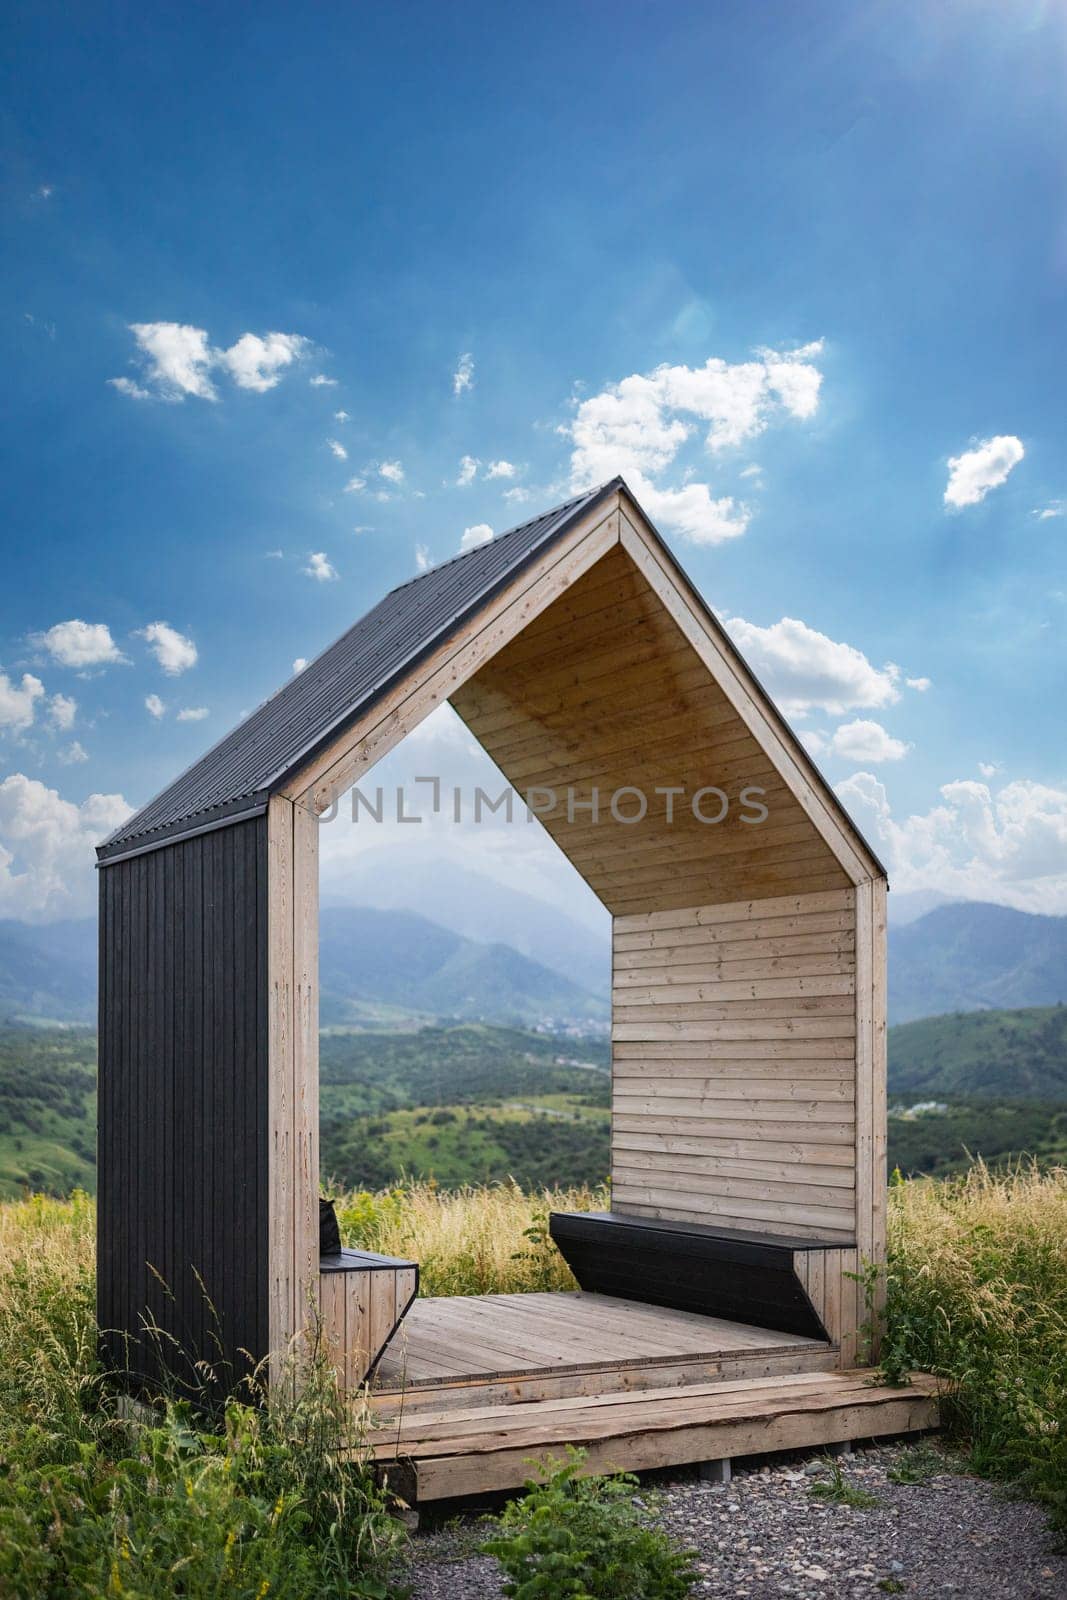 Wooden gazebo with benches for romantic weekend dating in summer nature. copy space, vertical